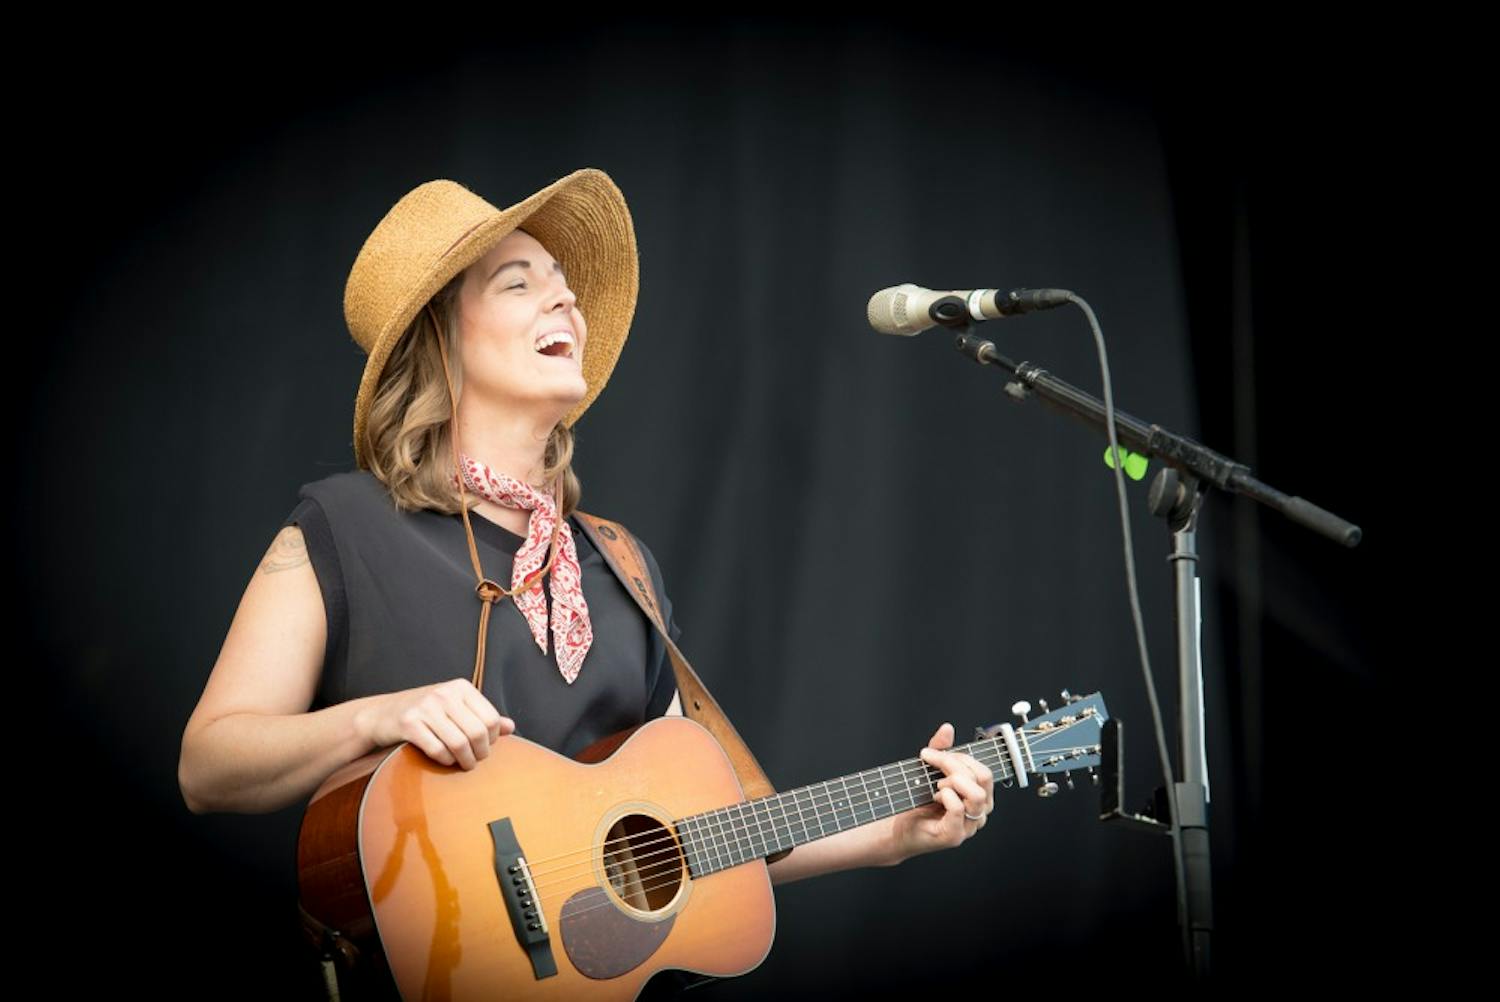 Singer-songwriter Brandi Carlile stole the hearts of fans during her set as well as her appearance at the end of Mumford & Sons' performance.